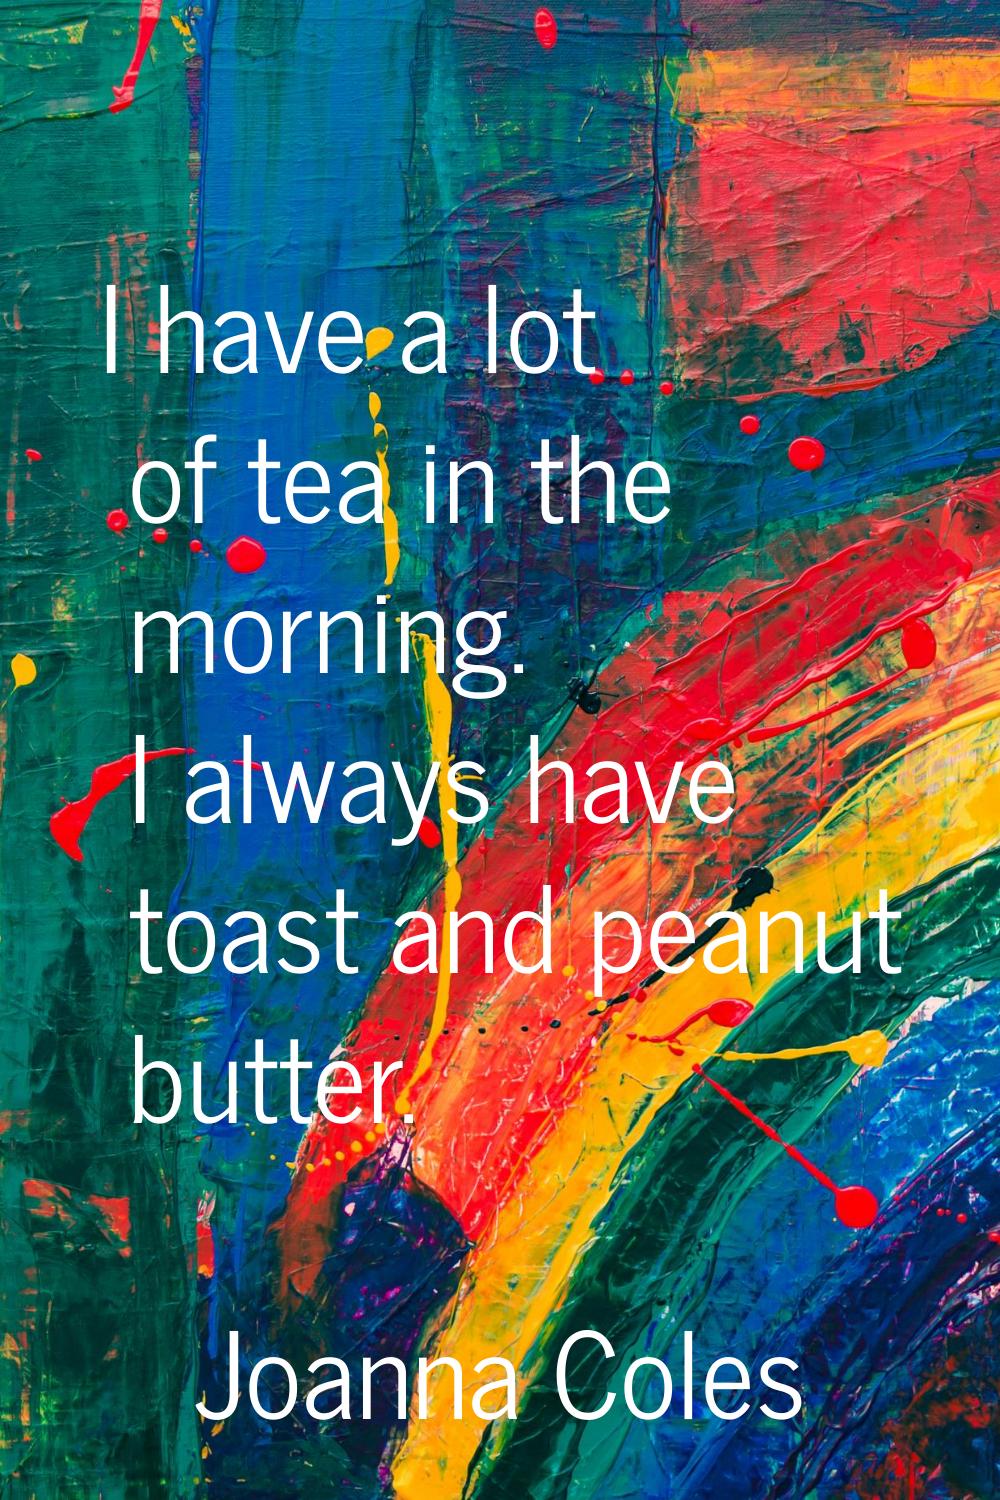 I have a lot of tea in the morning. I always have toast and peanut butter.